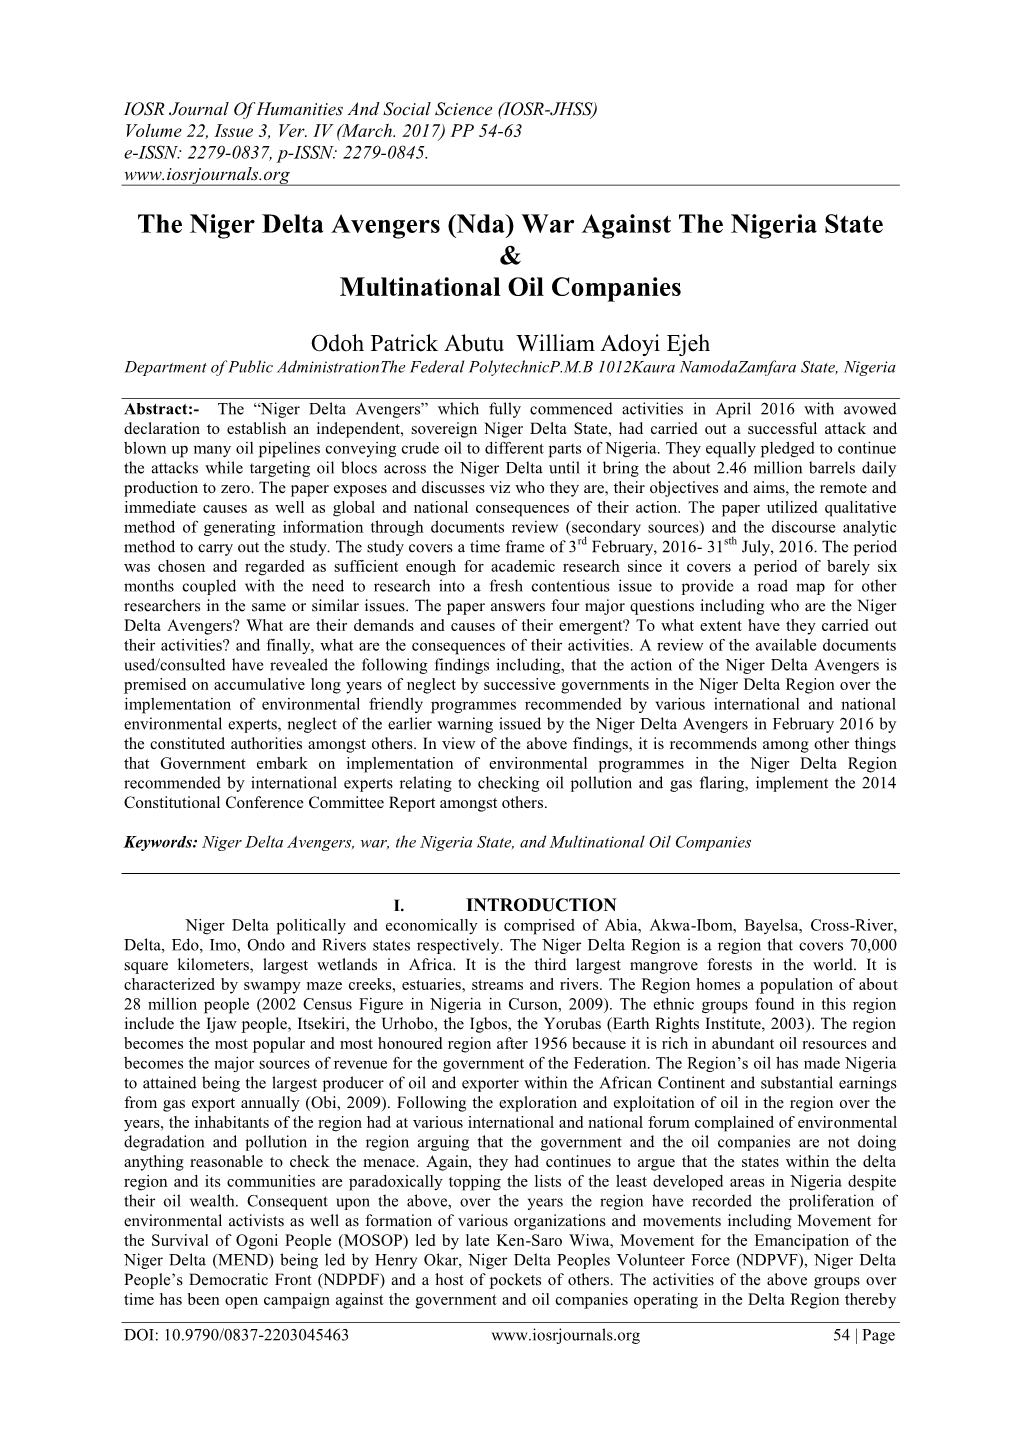 The Niger Delta Avengers (Nda) War Against the Nigeria State & Multinational Oil Companies